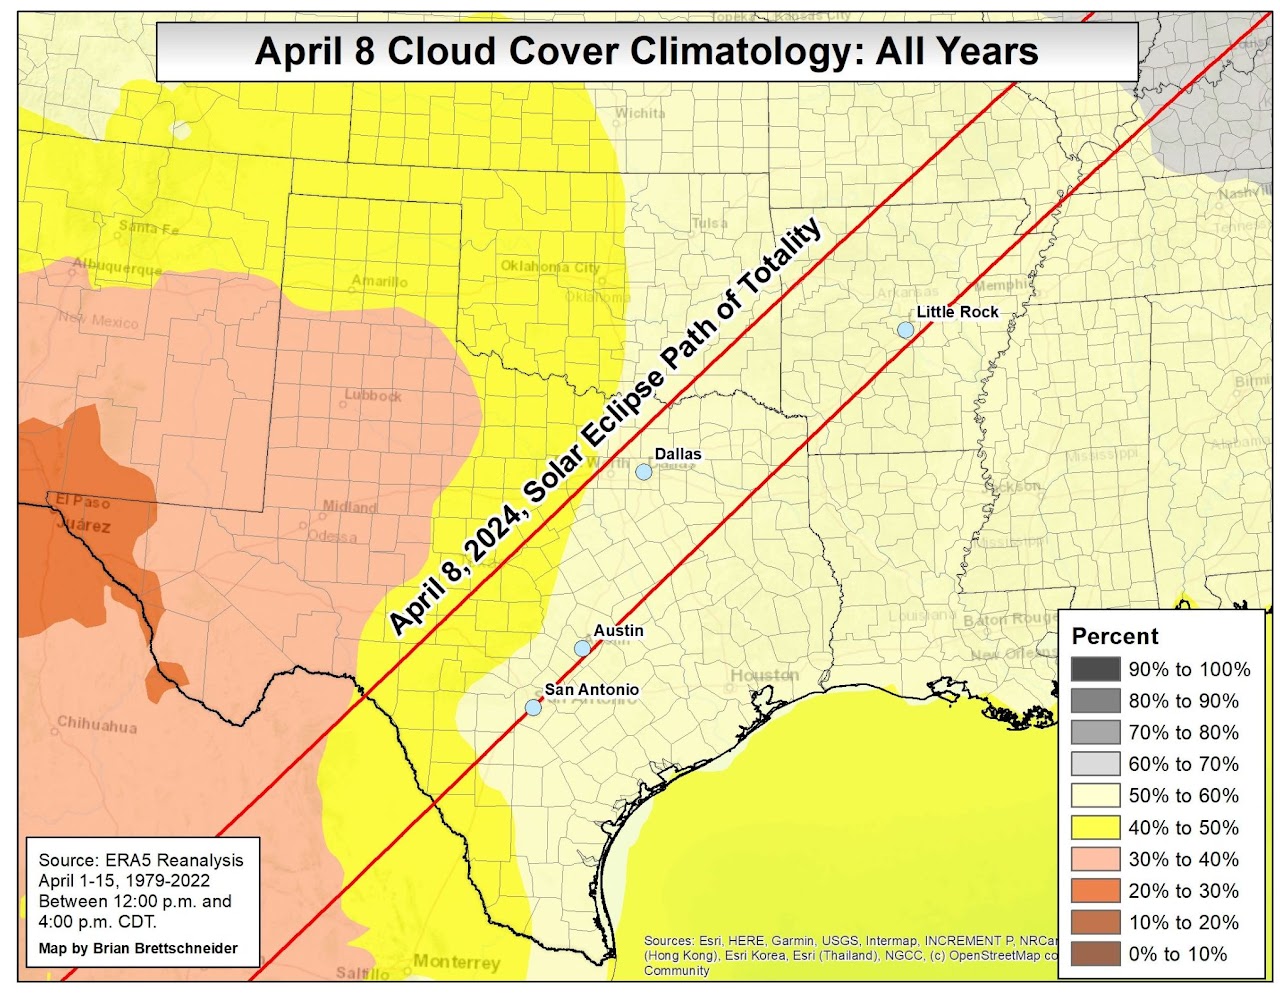 April 8 Cloud Cover Climatology - All Years